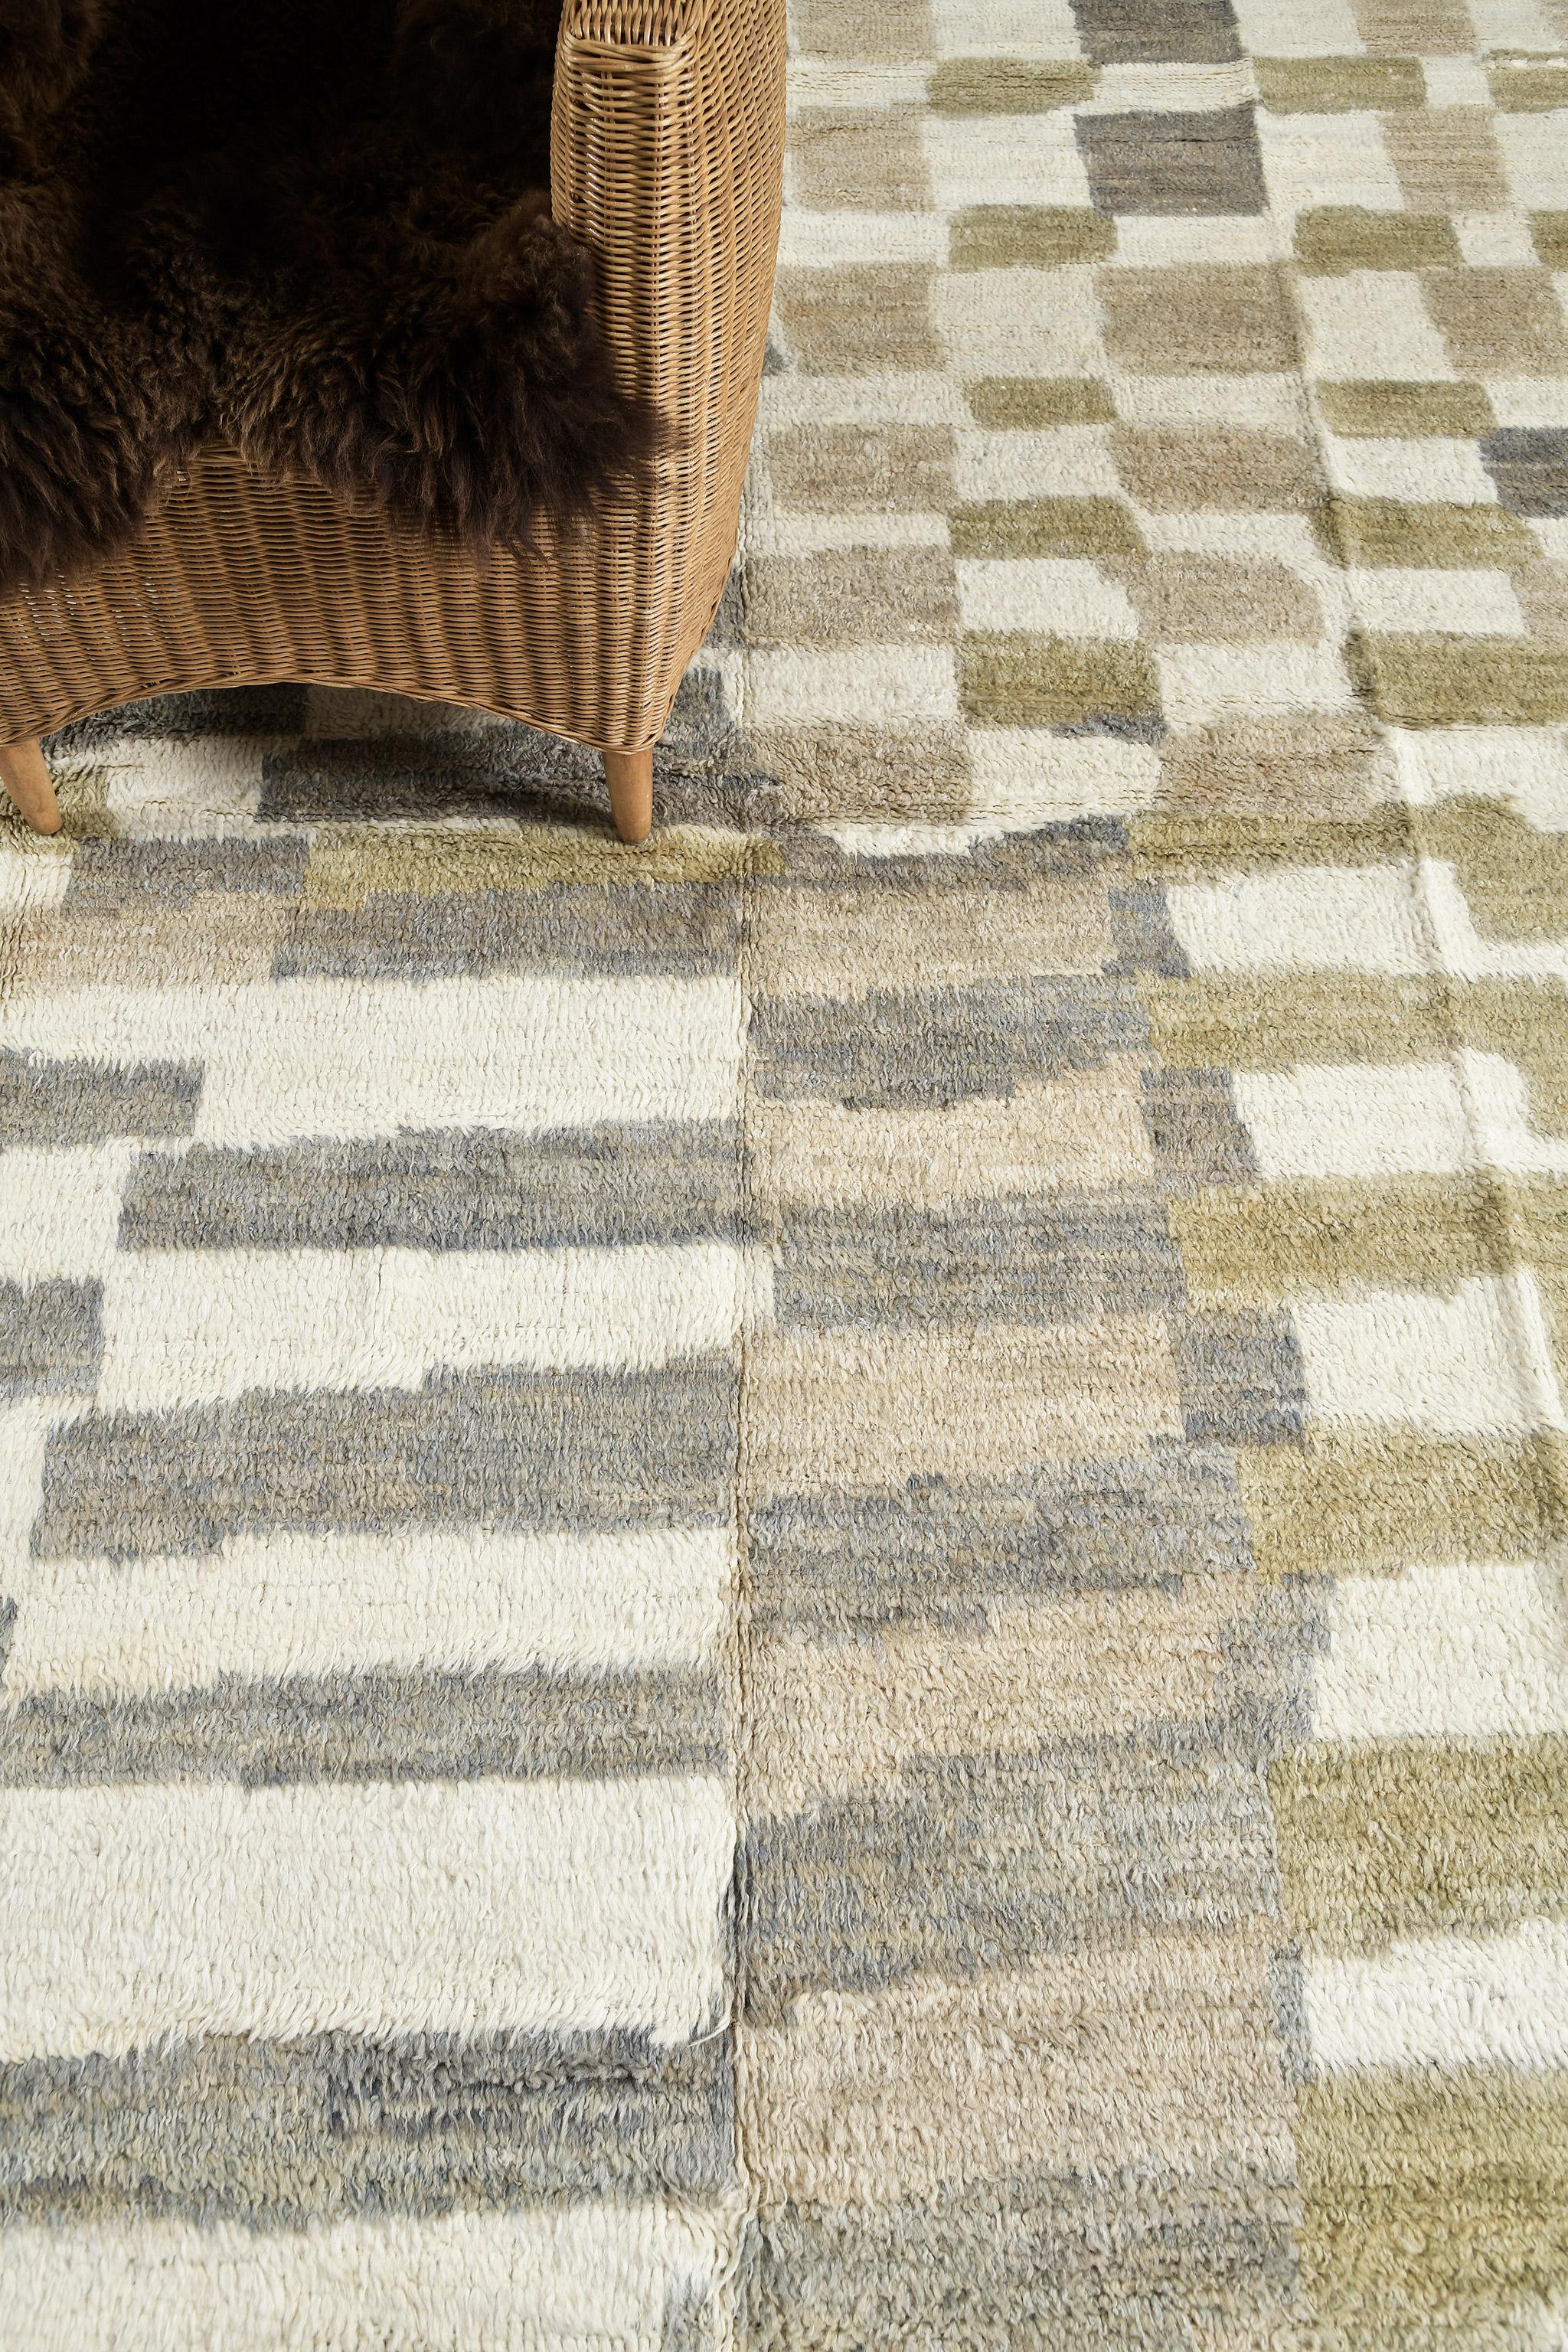 Martil' is a beautiful wool shag textured to look weathered as it combines unique design elements for the modern design world. Its weaving of natural earth tones and playfulness is suitable for many interiors and is what makes the Atlas Collection